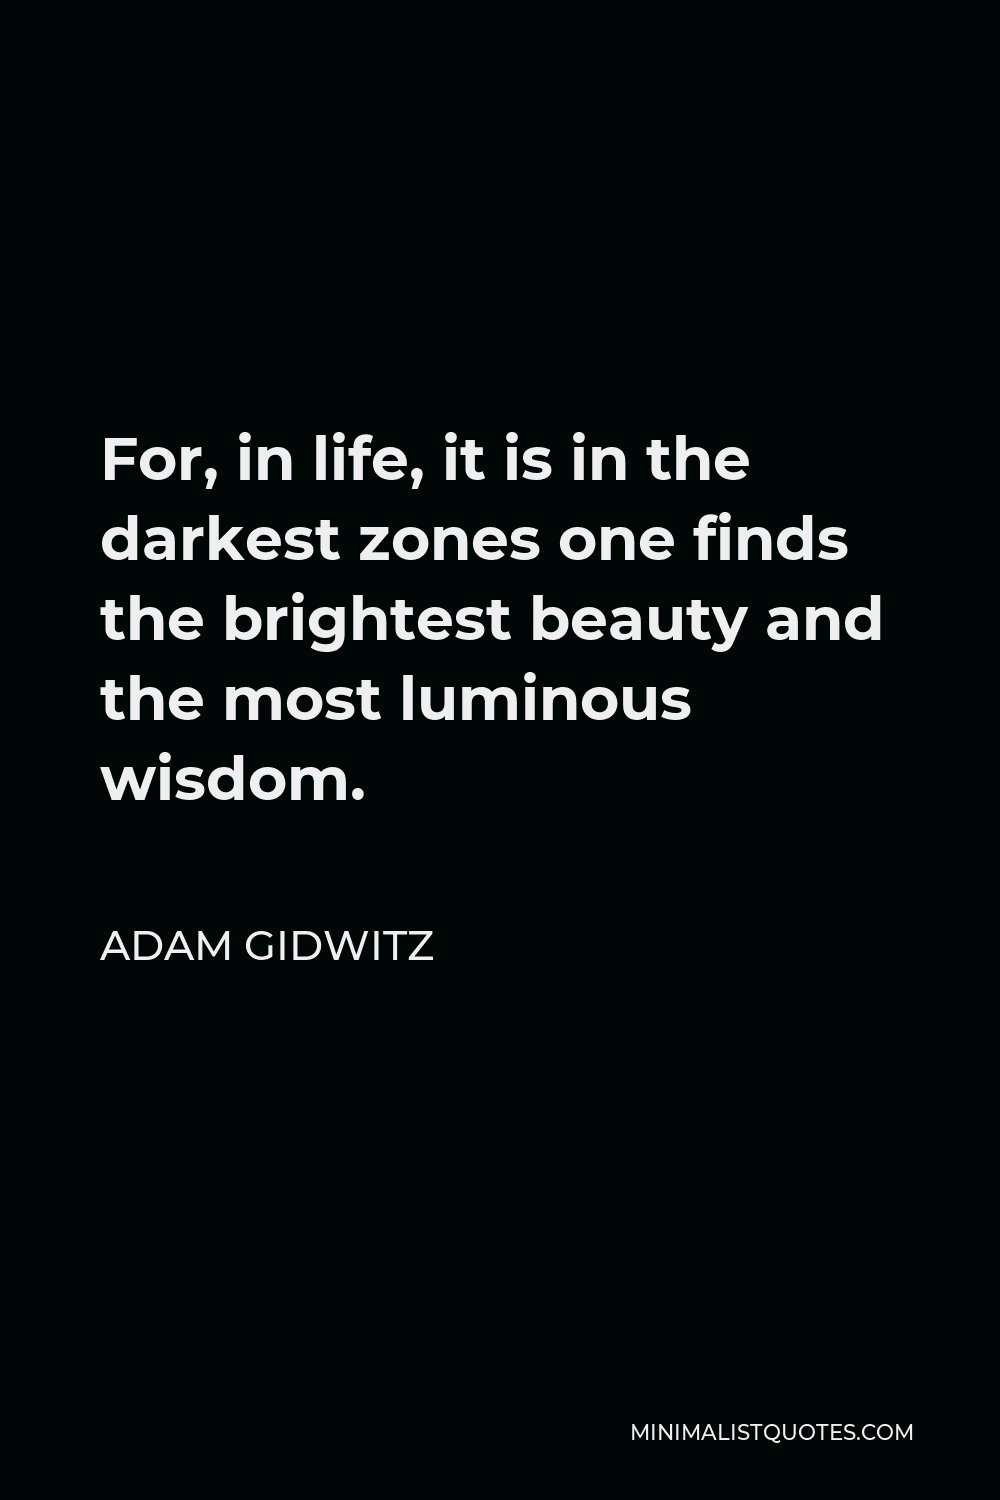 Adam Gidwitz Quote - For, in life, it is in the darkest zones one finds the brightest beauty and the most luminous wisdom.